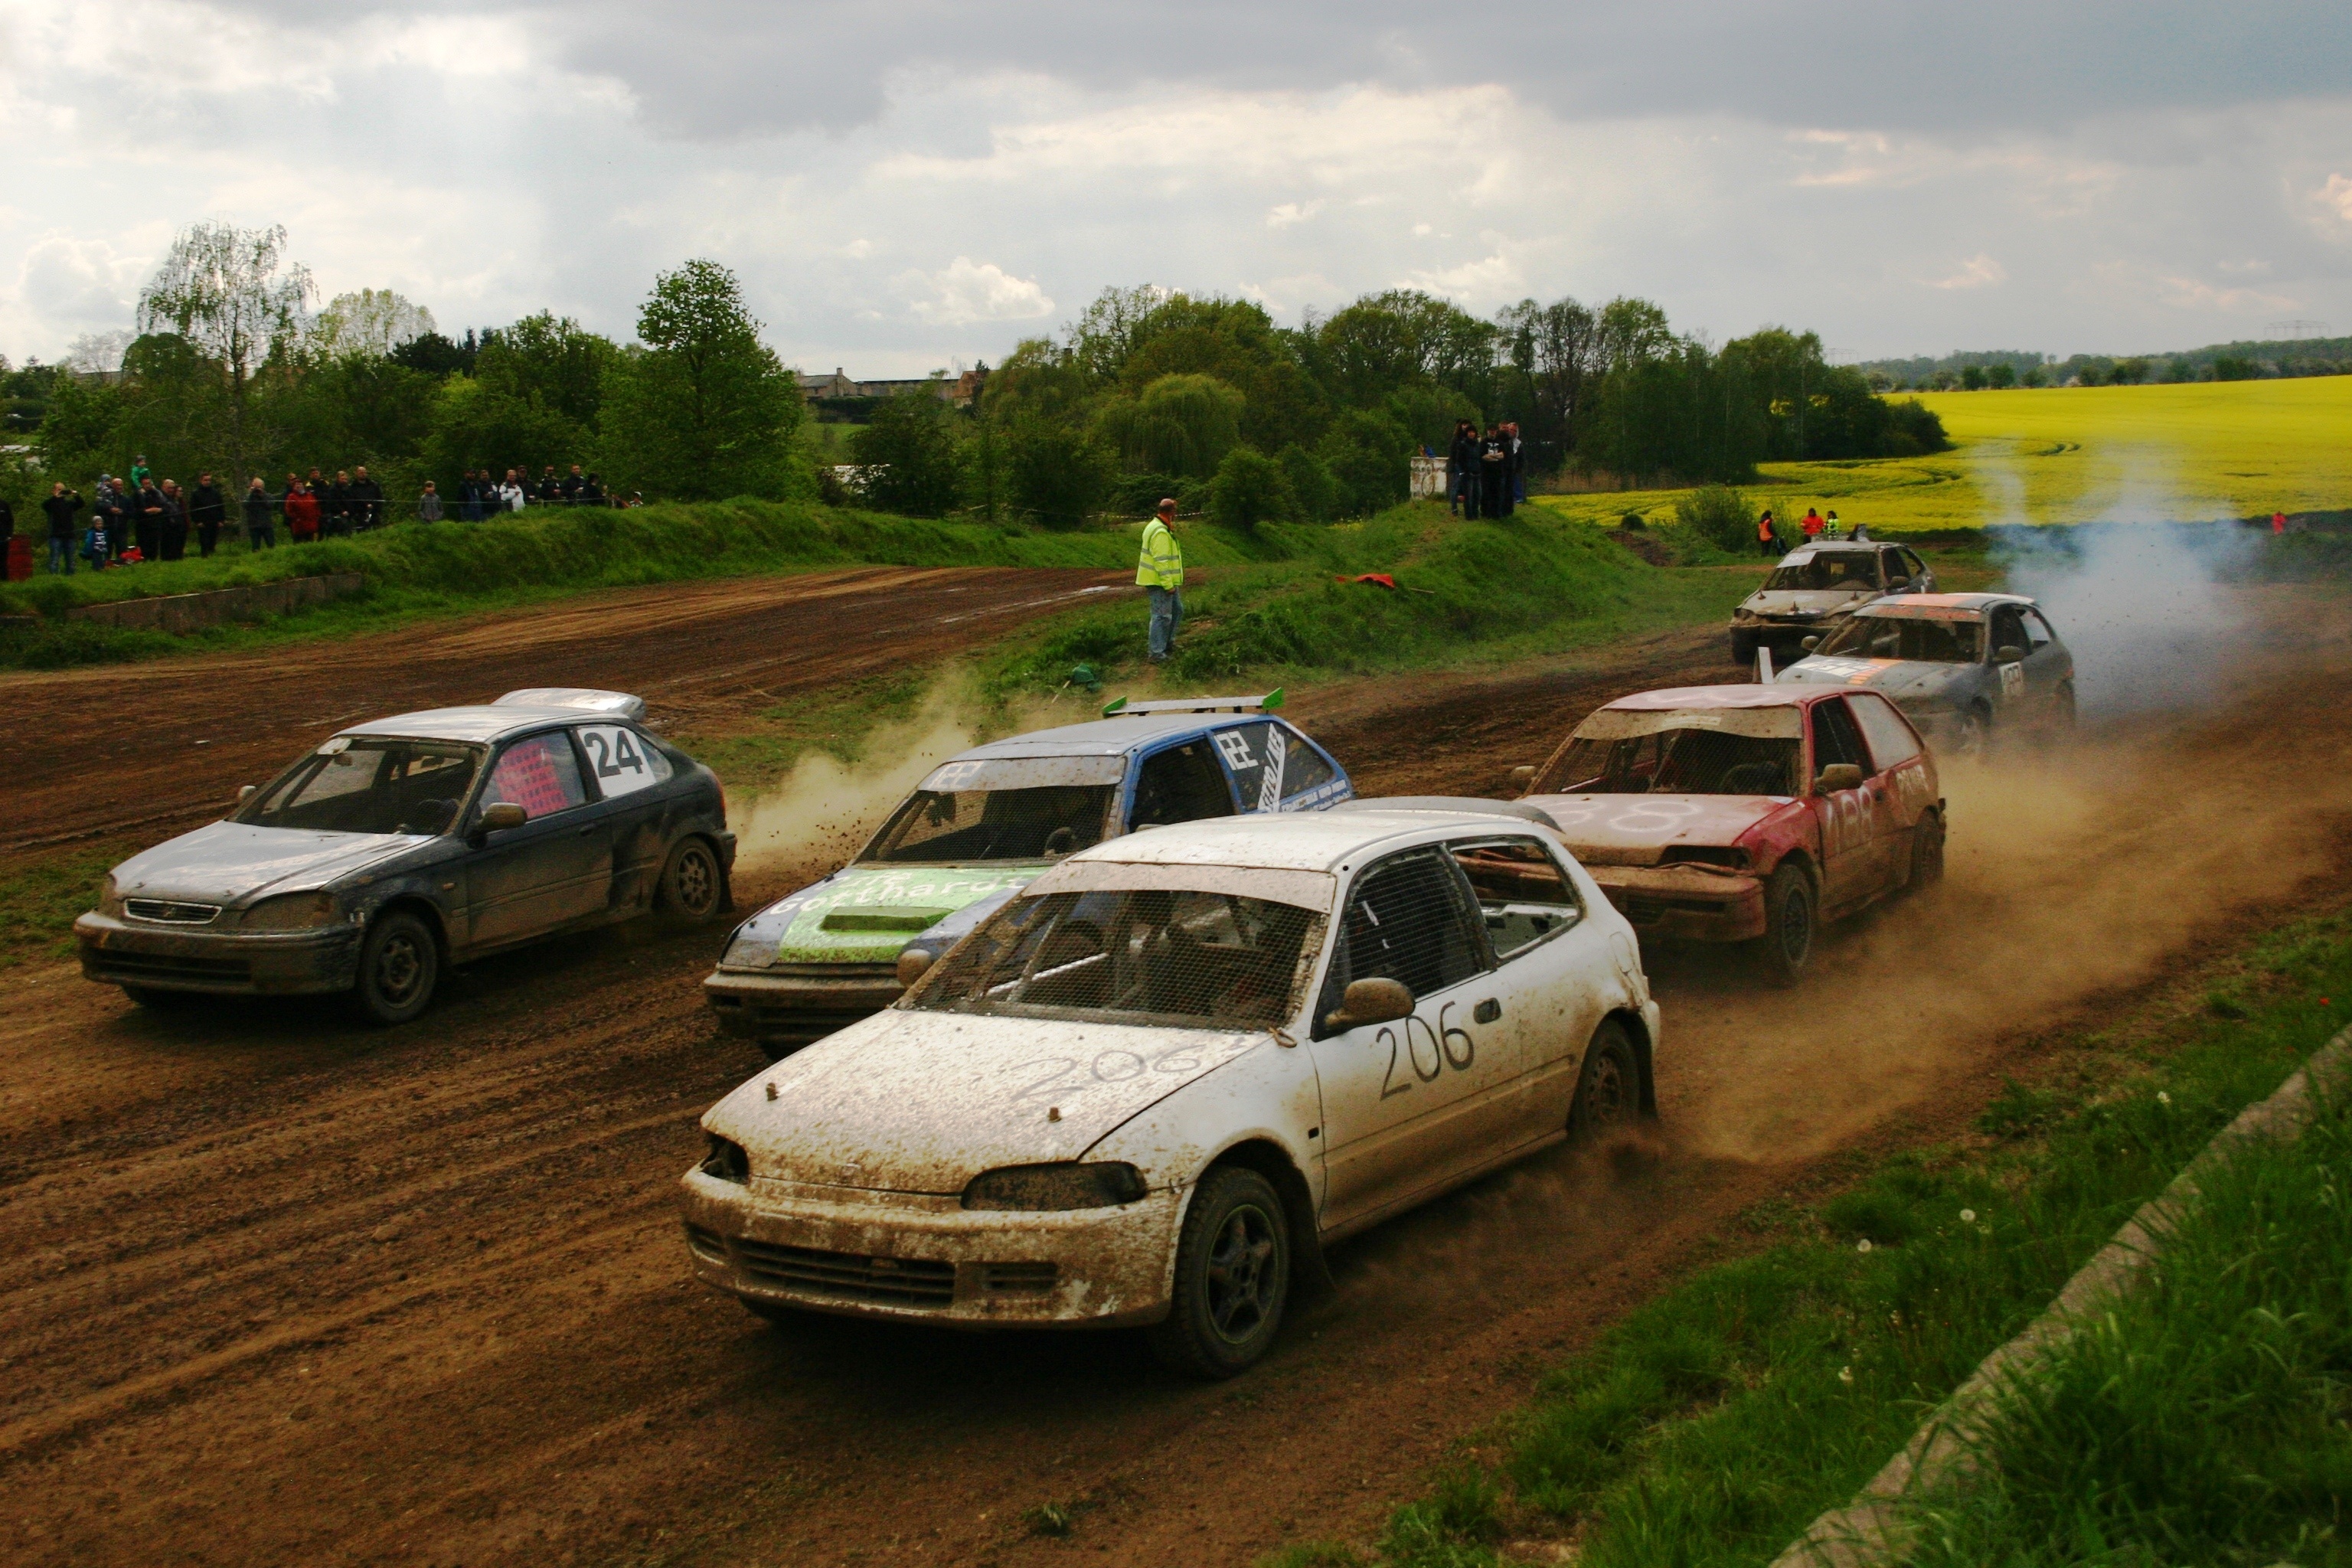 Autocross: Autoslalom, Rally, Off-road racing in the form of cross country events, Driving in the dirt. 3080x2050 HD Wallpaper.